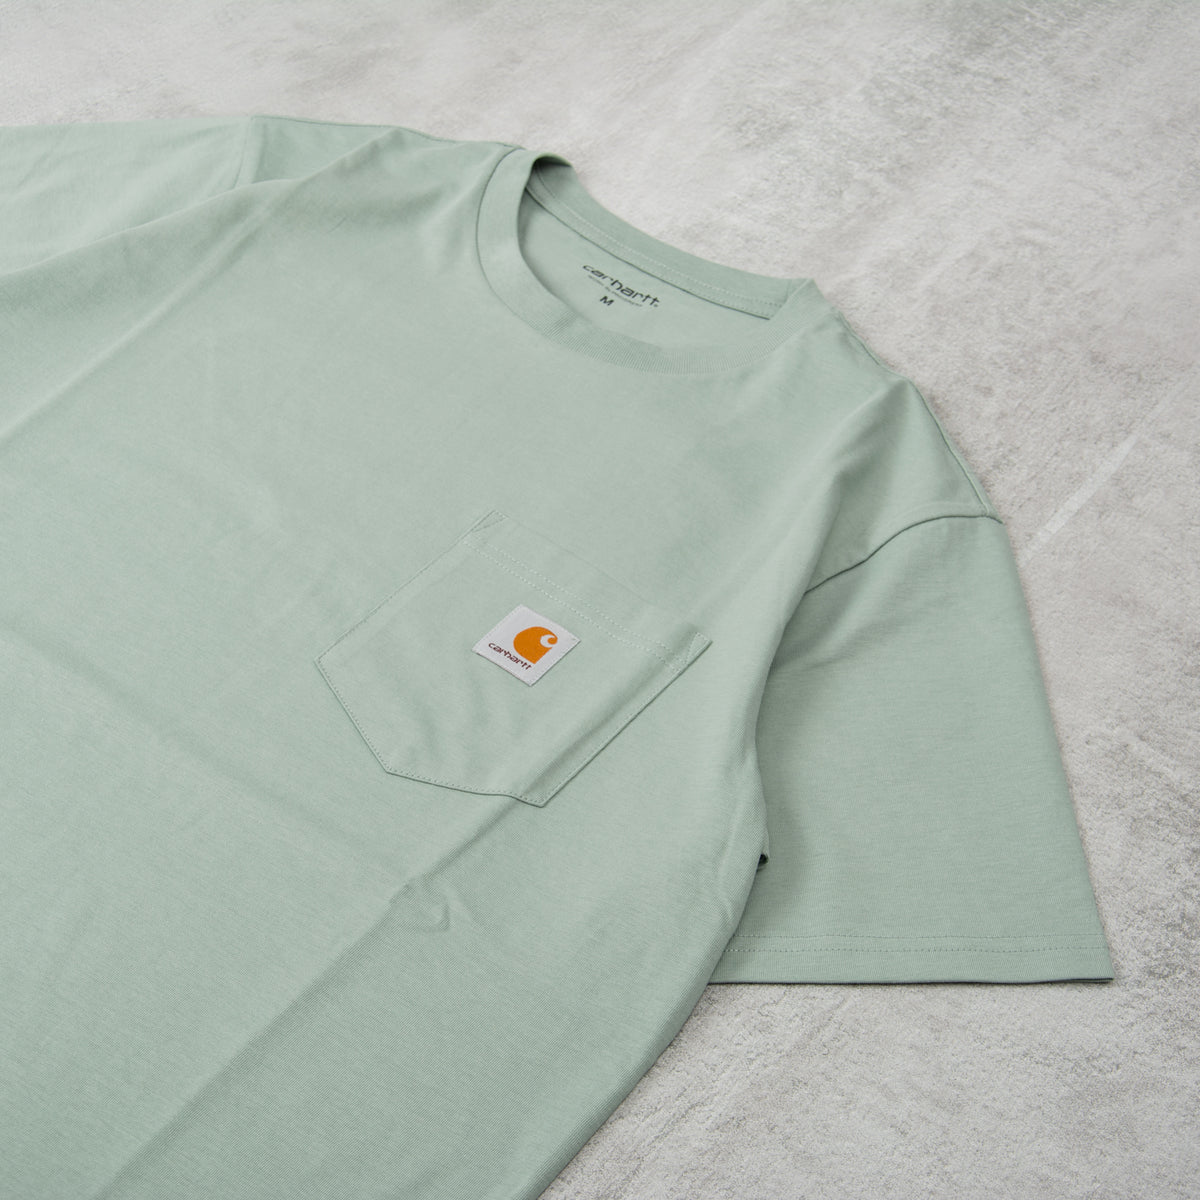 Get the Carhartt WIP S/S Pocket Tee -Glassy Teal@Union Clothing | Union ...